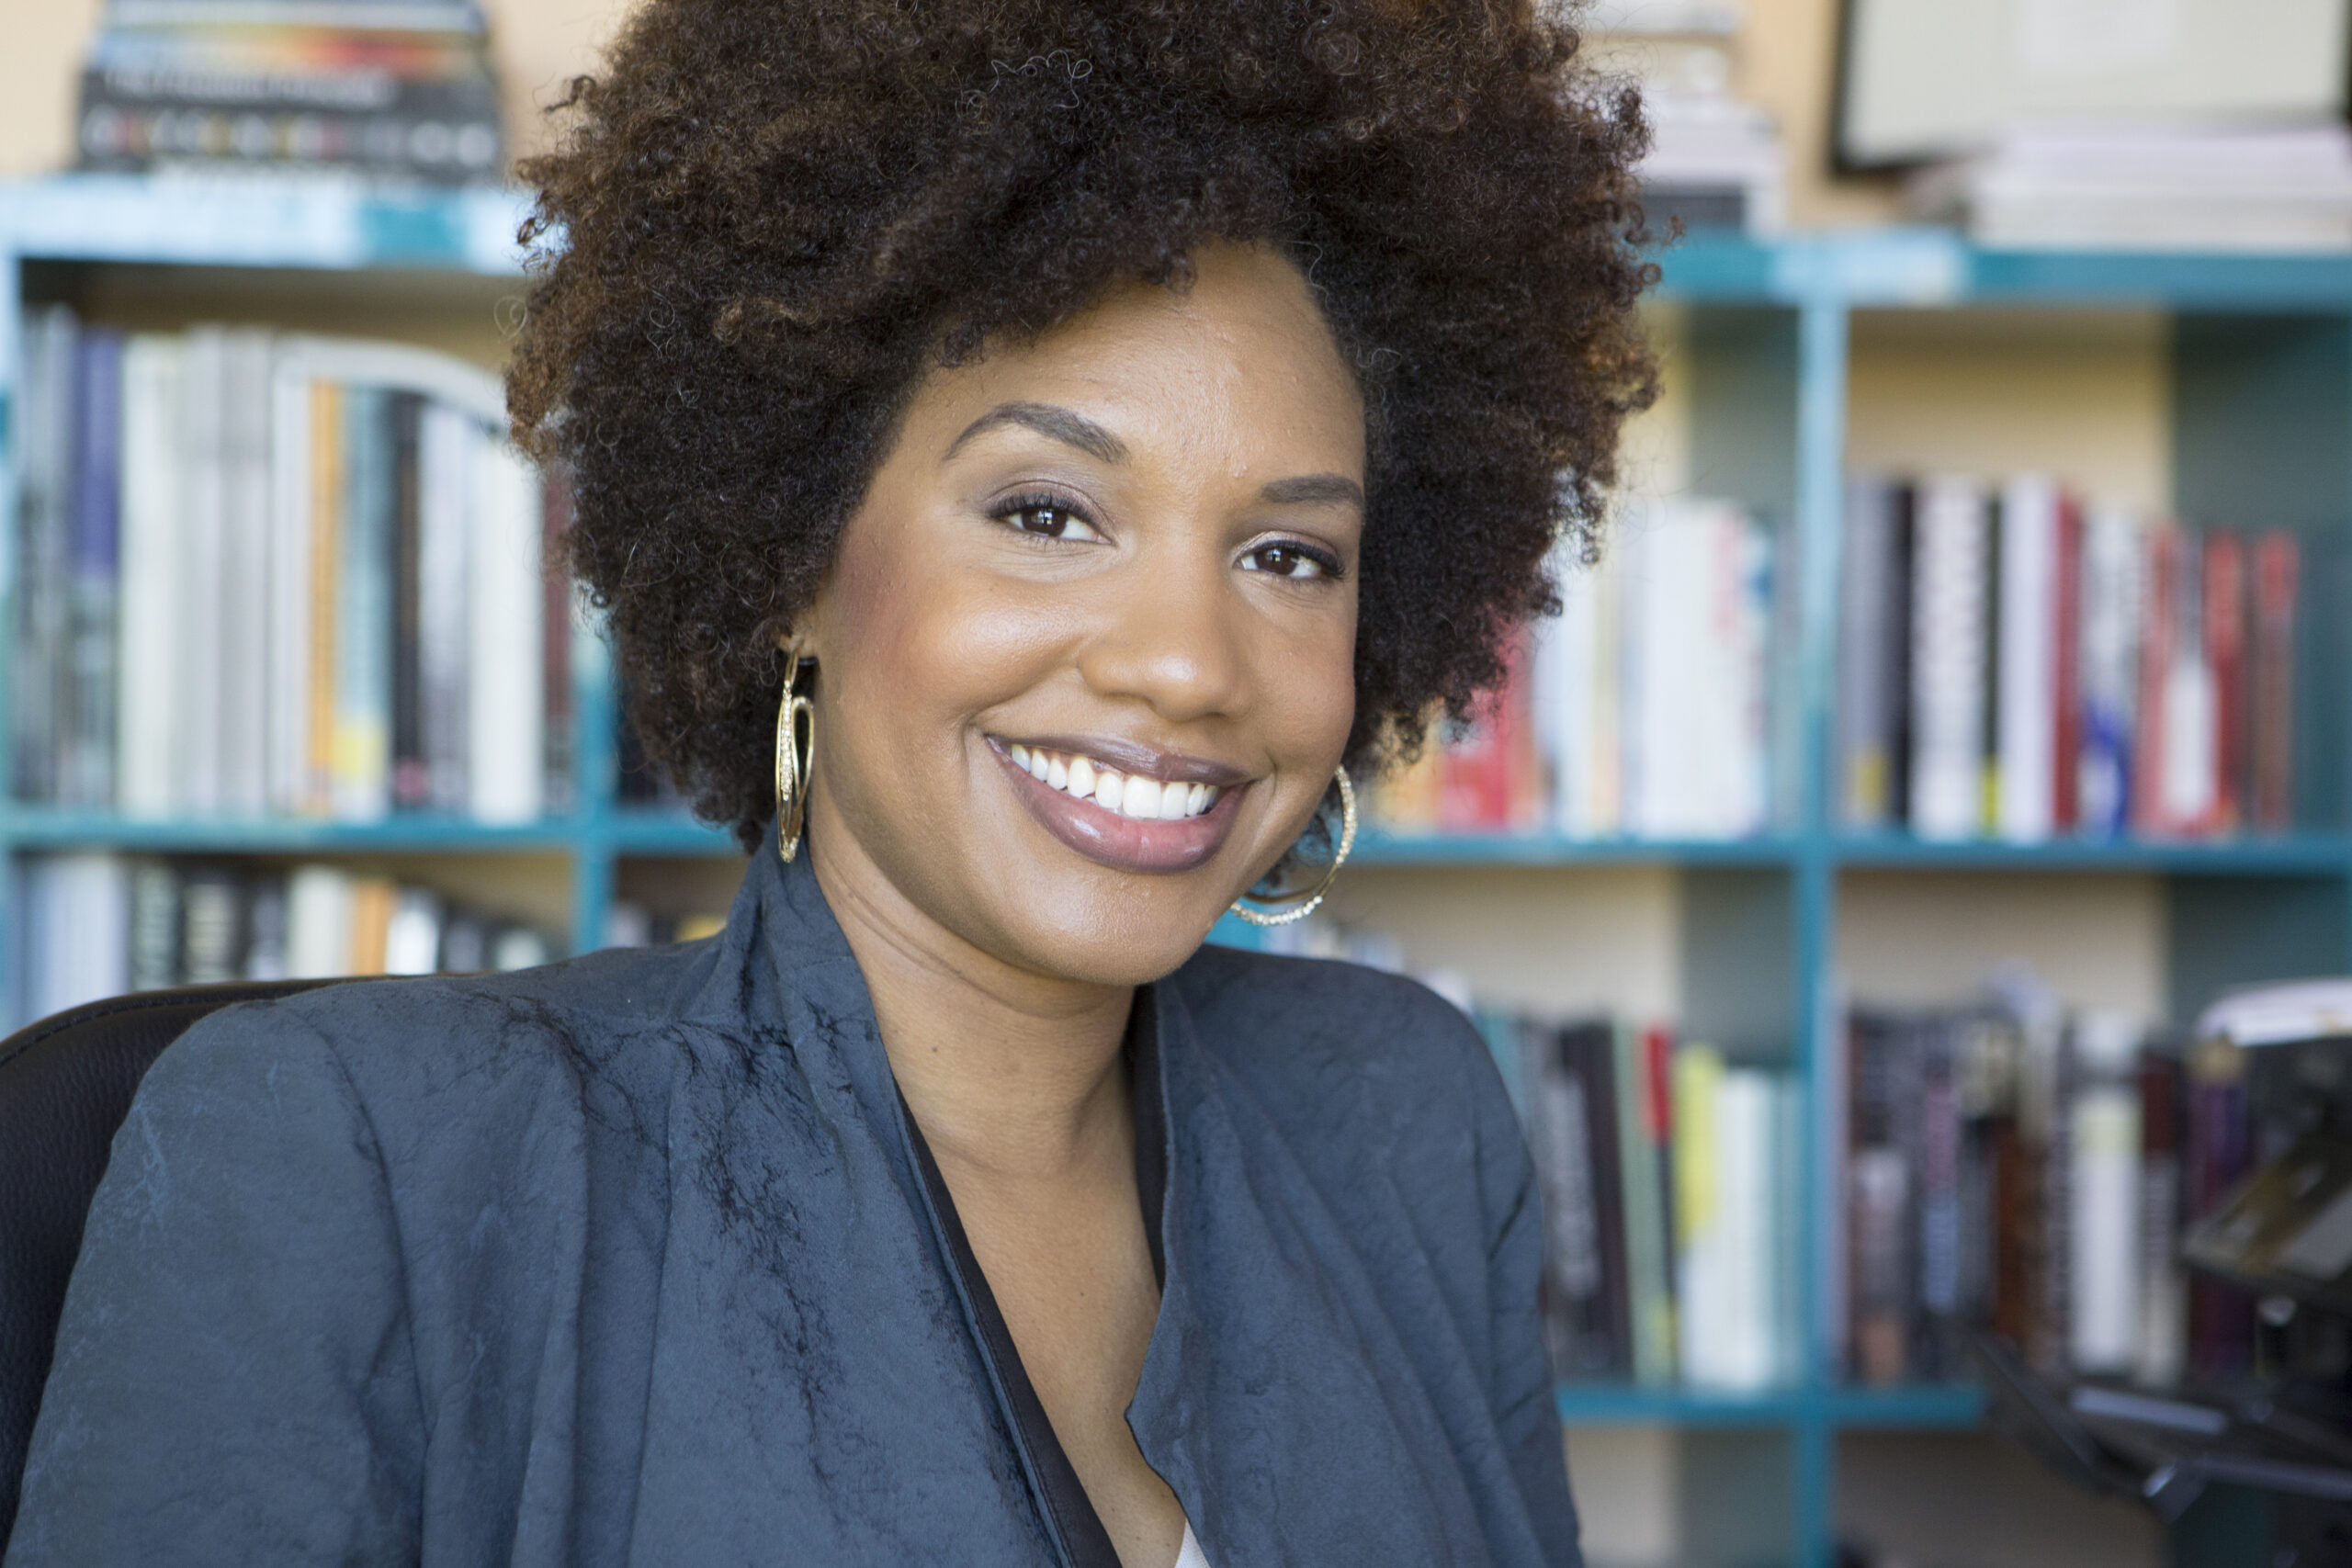 Headshot of photographer LaToya Ruby Frazier in navy top with blurred bookshelves in the background